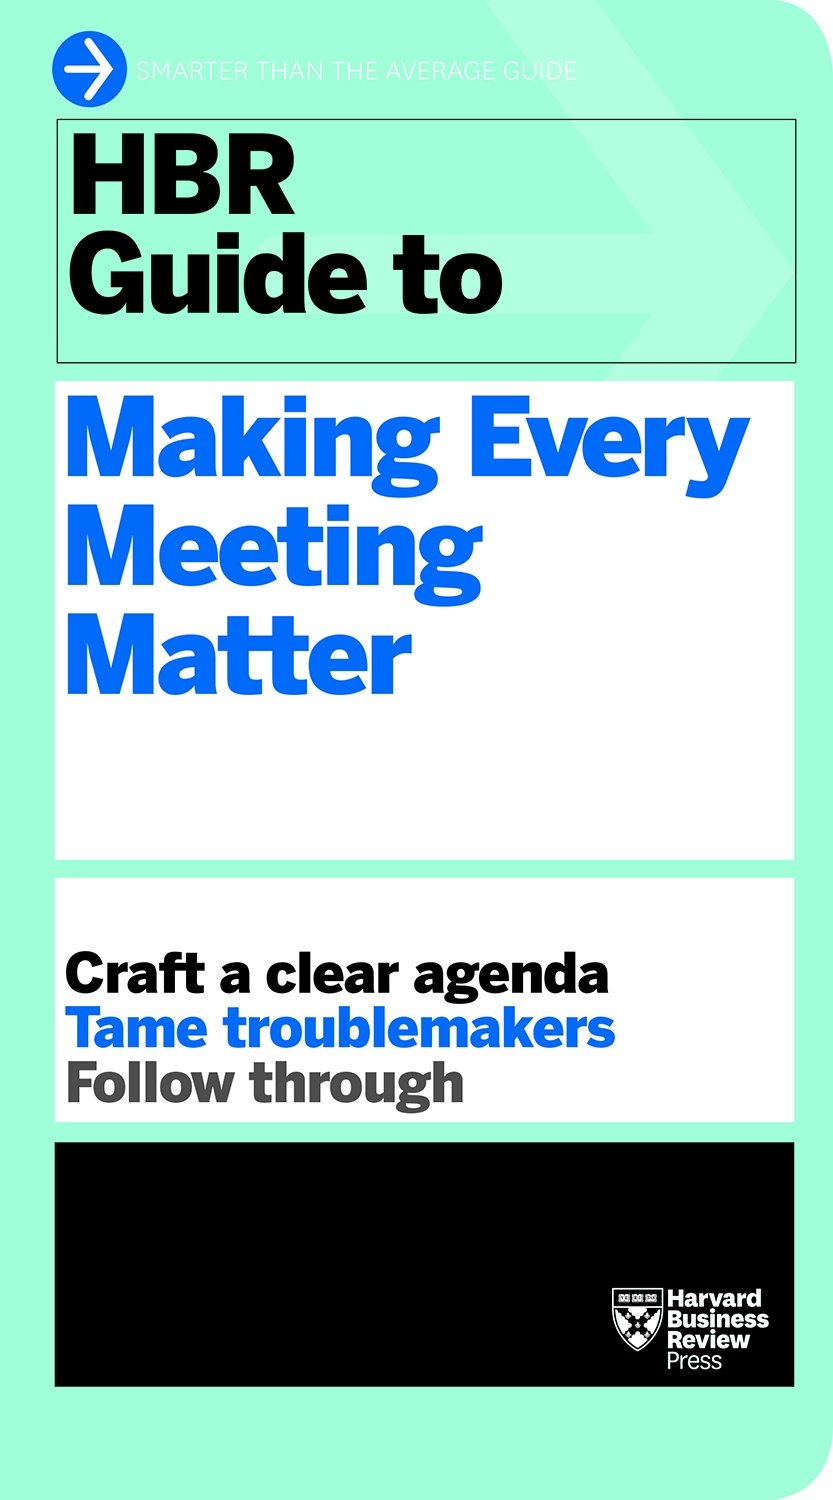 HBR Guide to Making Every Meeting Matter (HBR Guide Series) | Harvard